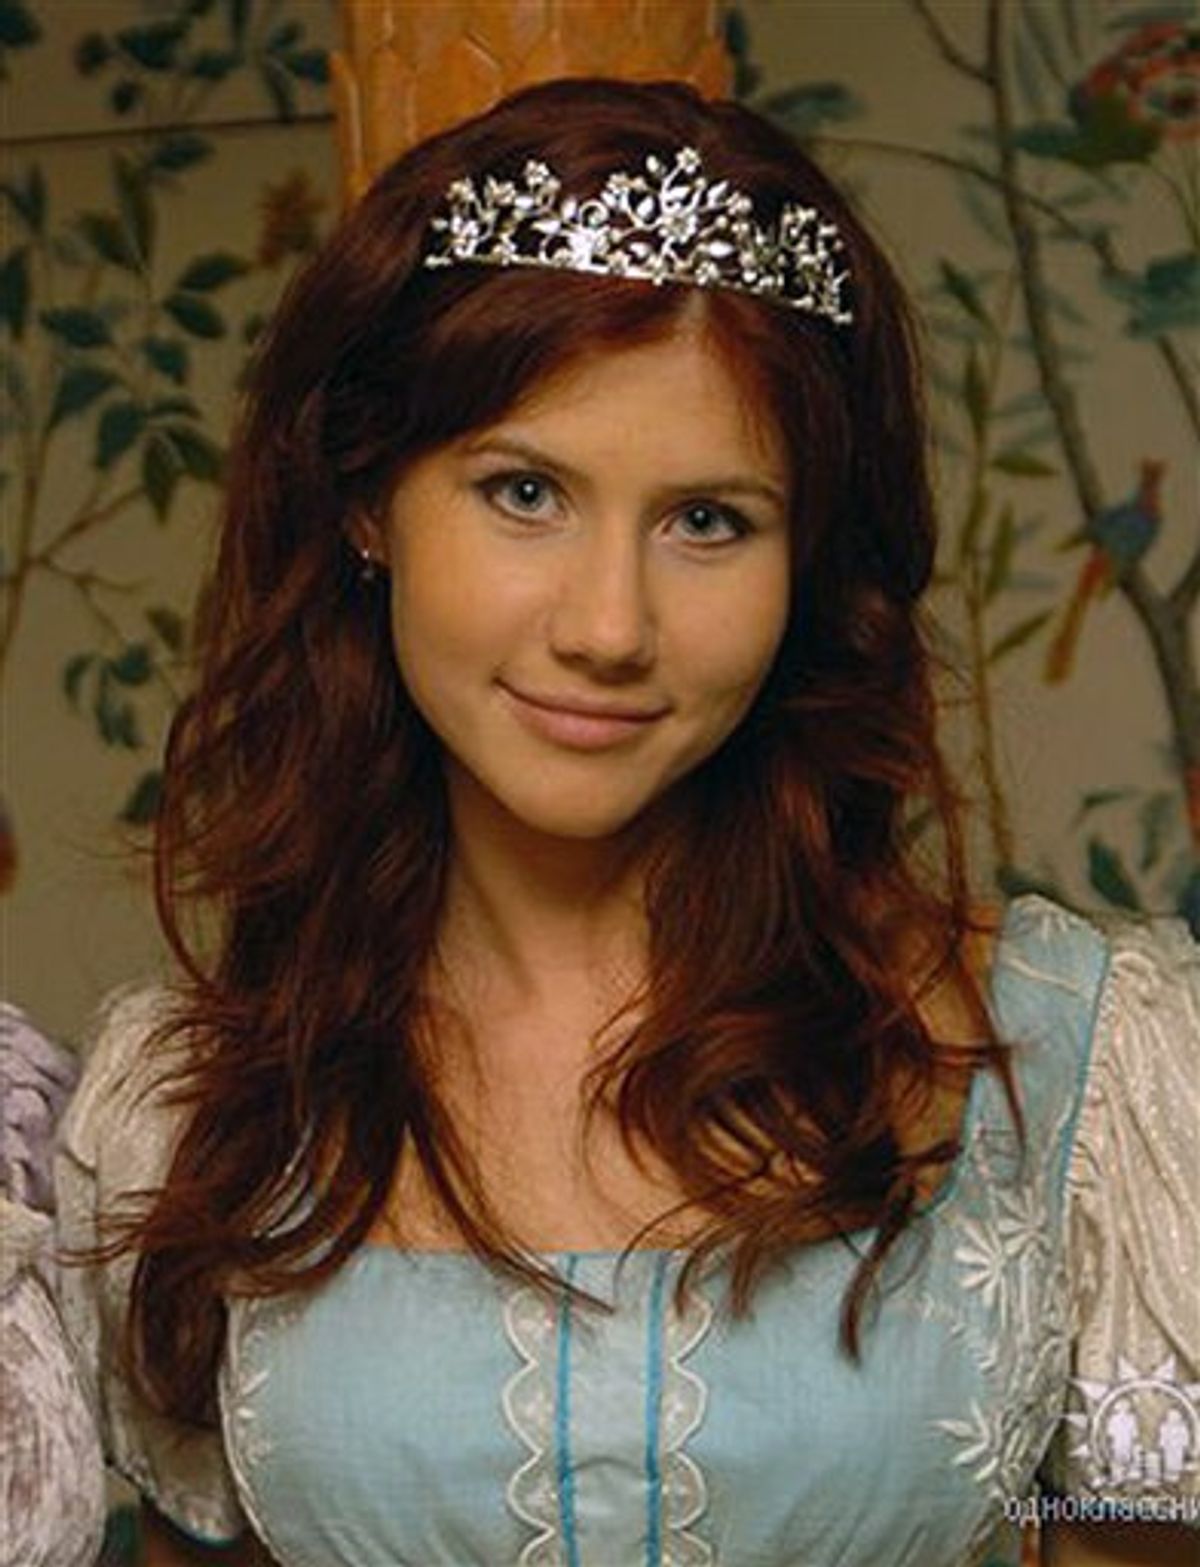 This undated image taken from the Russian social networking website "Odnoklassniki", or Classmates, shows a woman journalists have identified as Anna Chapman, who appeared at a hearing Monday, June 28, 2010 in New York federal court. Chapman, along with 10 others, was arrested on charges of conspiracy to act as an agent of a foreign government without notifying the U.S. attorney general. The caption on Odnoklassniki reads "Russia, Moscow. London, Stone age." (AP Photo)  (AP)